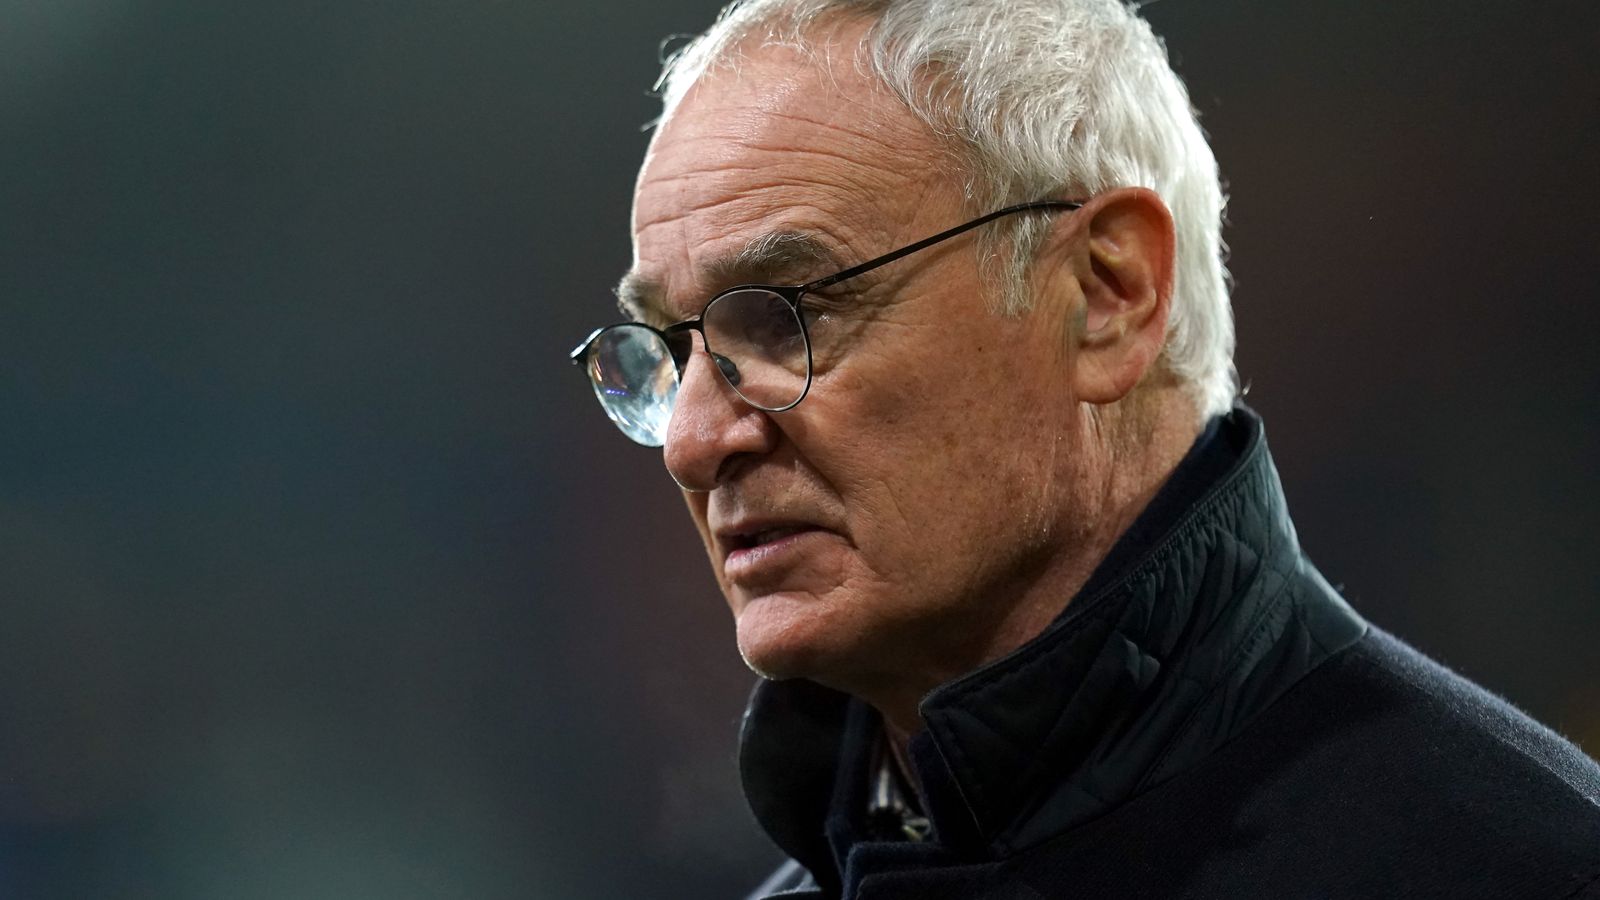 Claudio Ranieri: Watford boss vows to fight on and calls for mentality shift after Norwich defeat